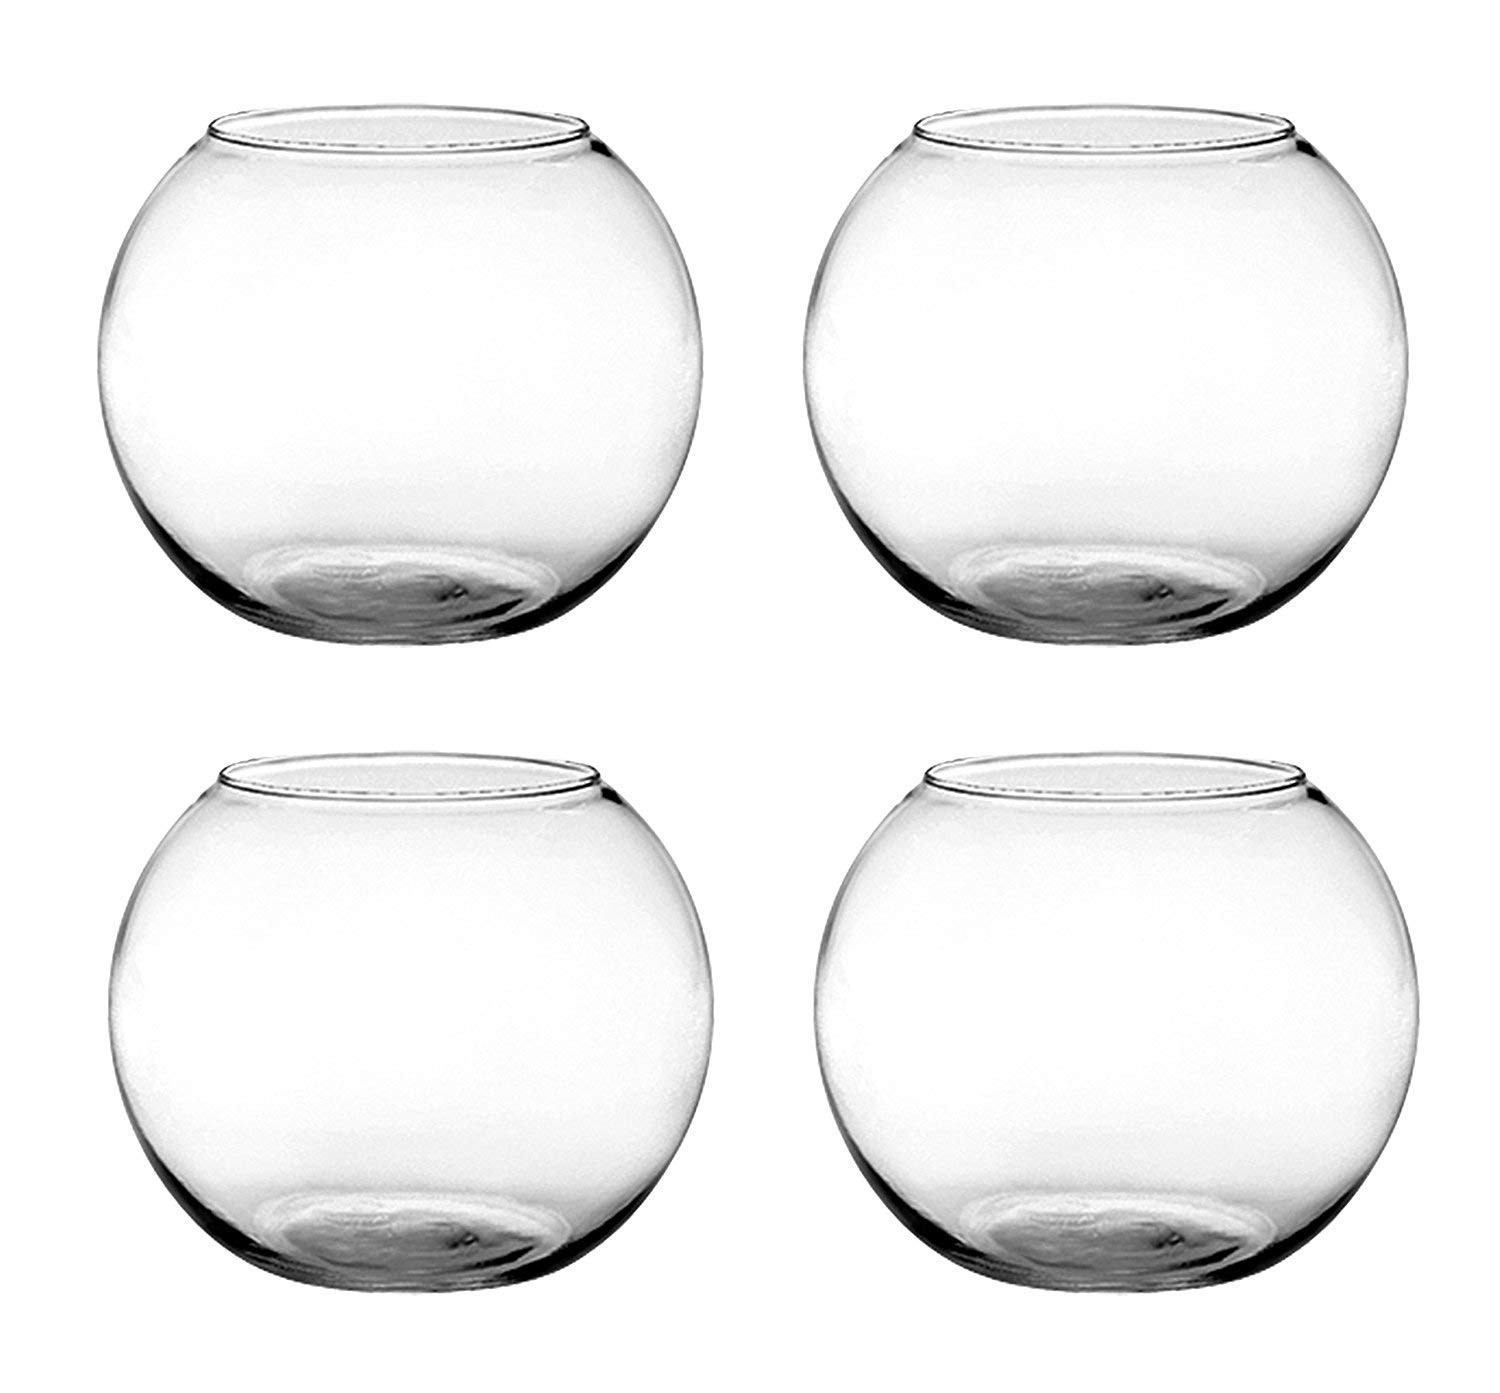 19 Best Cheap Glass Round Vases 2024 free download cheap glass round vases of amazon com floral supply online set of 4 6 rose bowls glass throughout amazon com floral supply online set of 4 6 rose bowls glass round vases for weddings events 